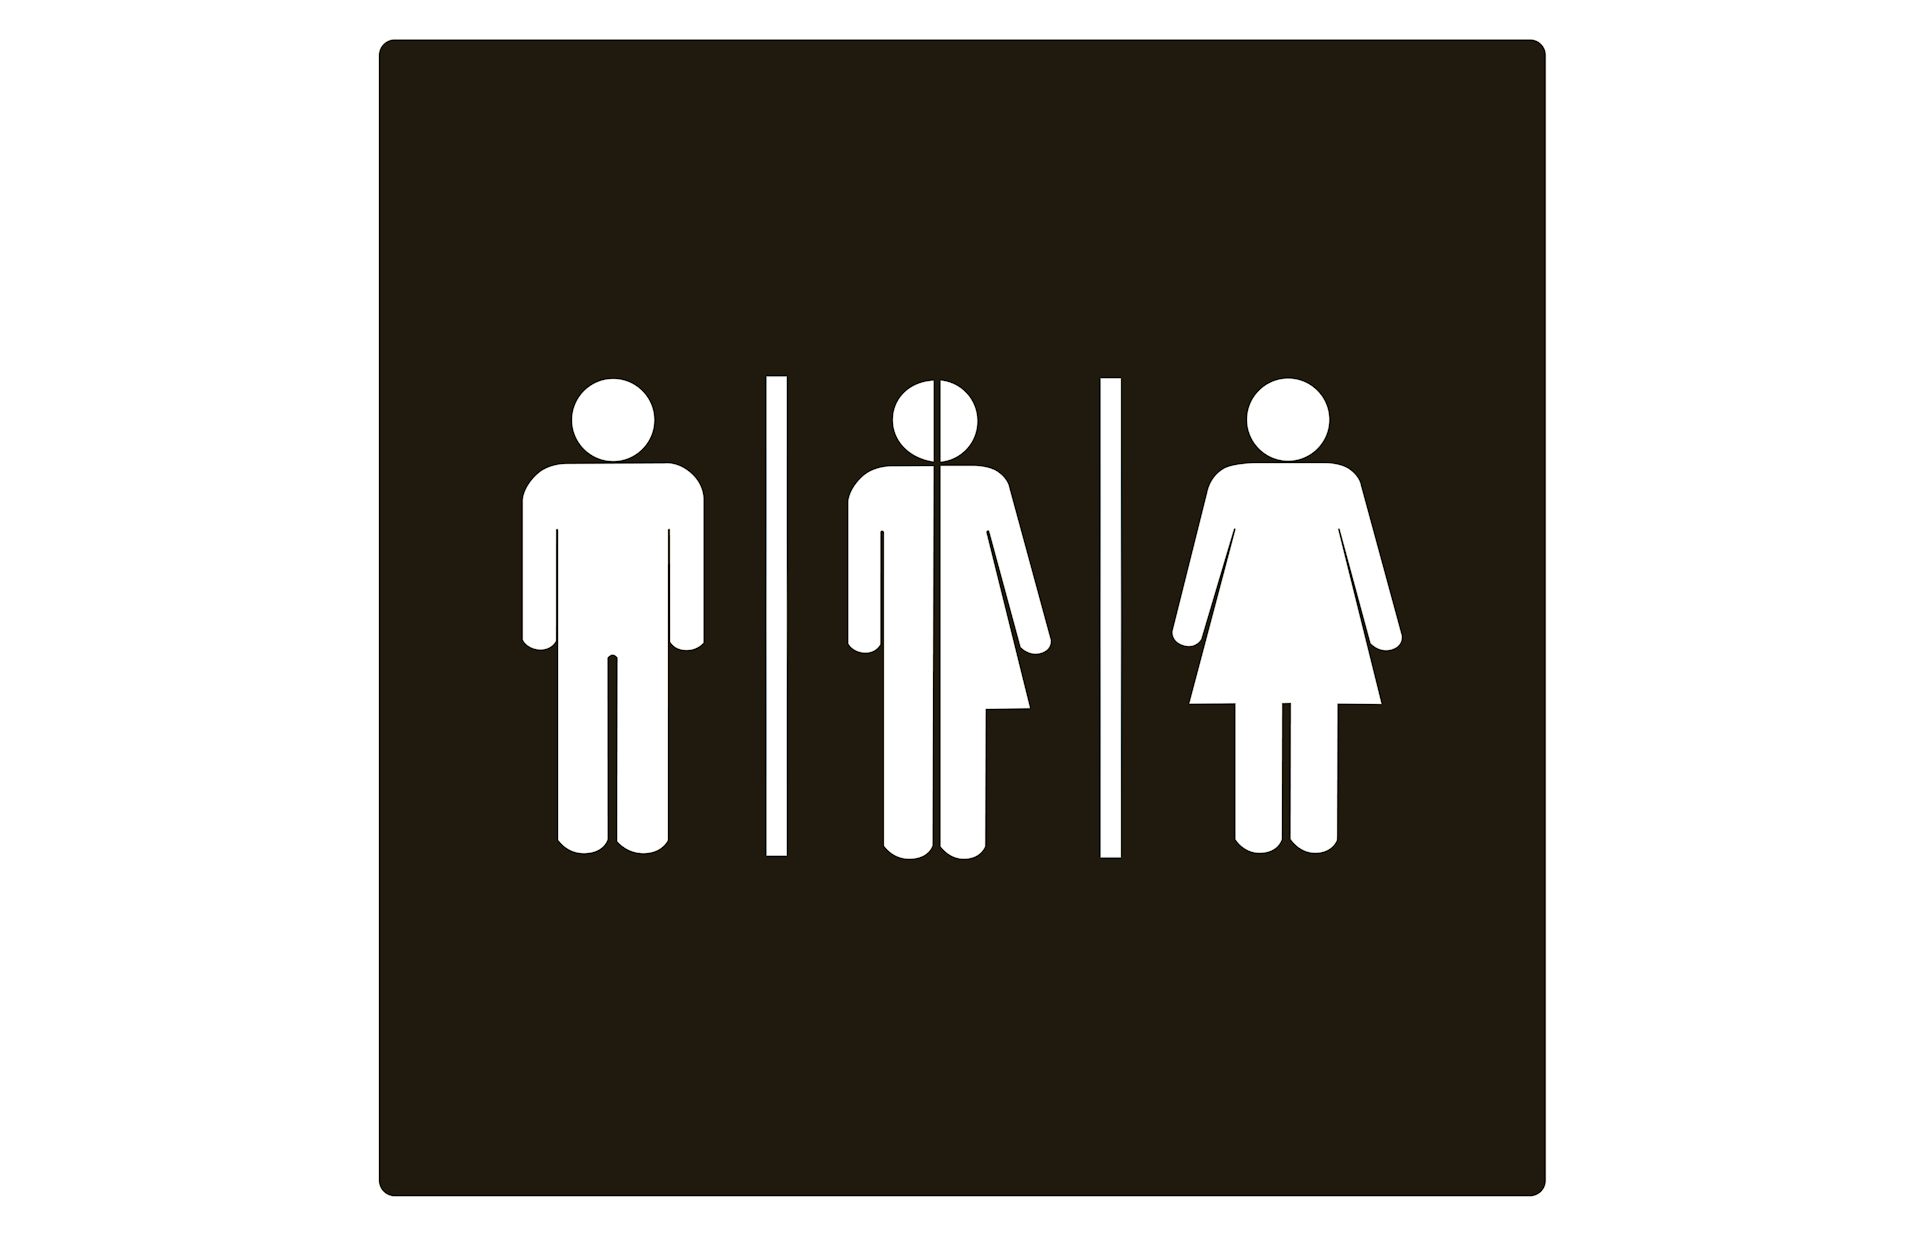 Bathrooms are political how gender-inclusive toilets can combat indignity and violence photo